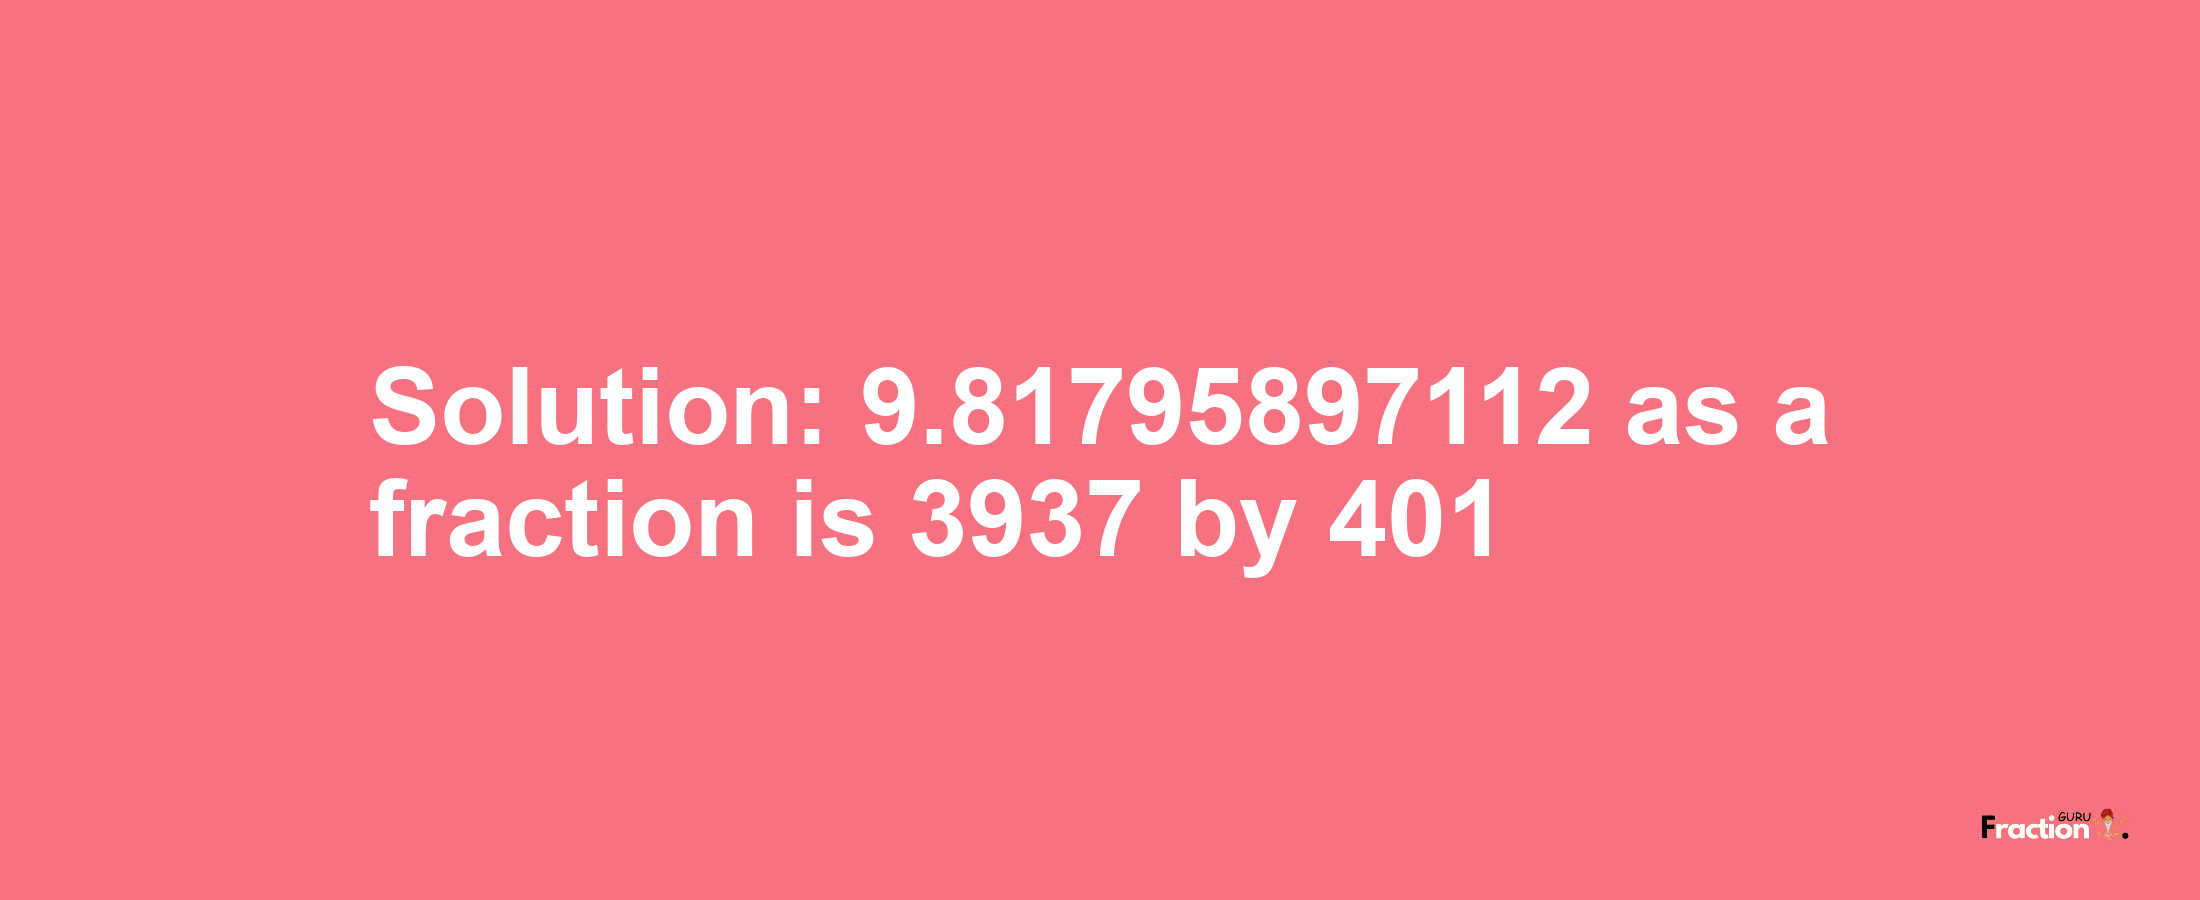 Solution:9.81795897112 as a fraction is 3937/401